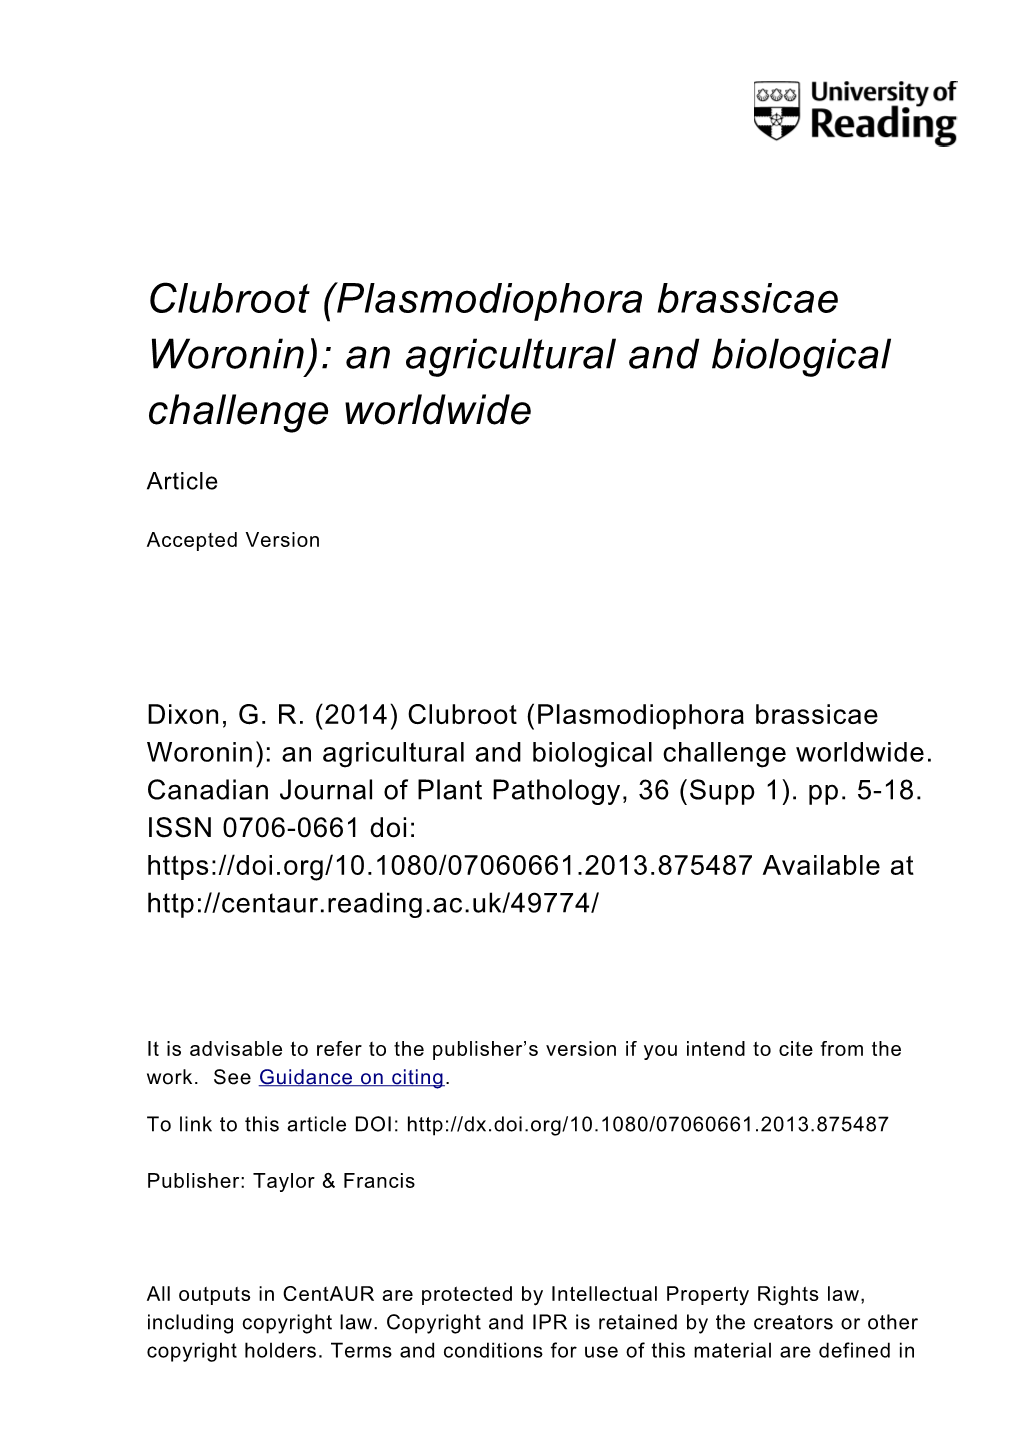 Clubroot (Plasmodiophora Brassicae Woronin): an Agricultural and Biological Challenge Worldwide